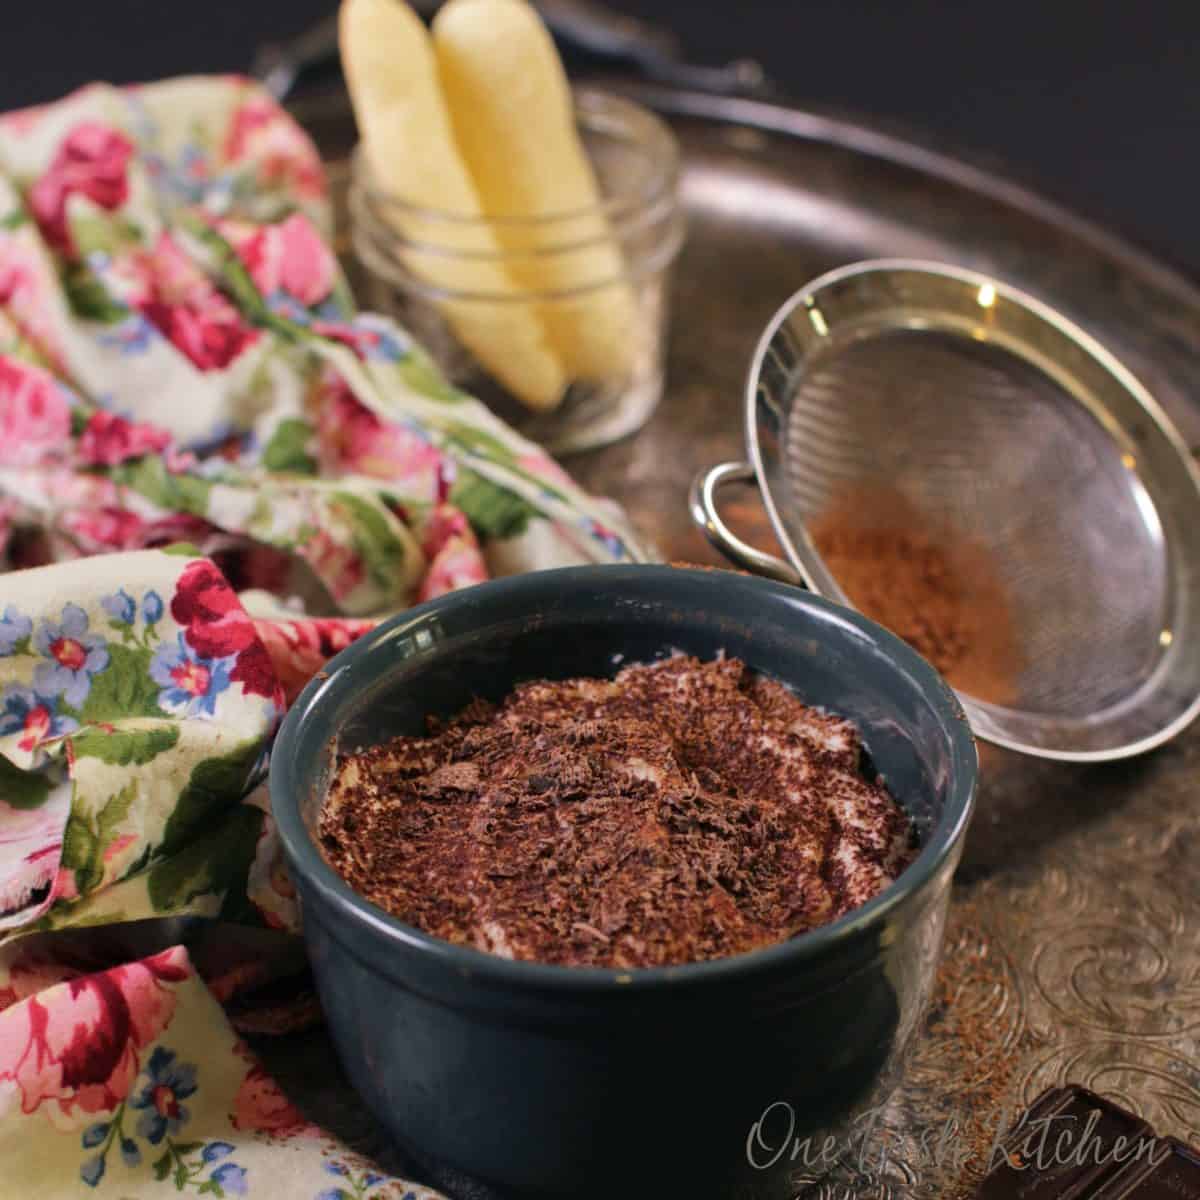 Tiramisu in a small circular dish topped with chocolate shavings next to a jar of homemade ladyfingers and a floral cloth napkin all on a metal tray